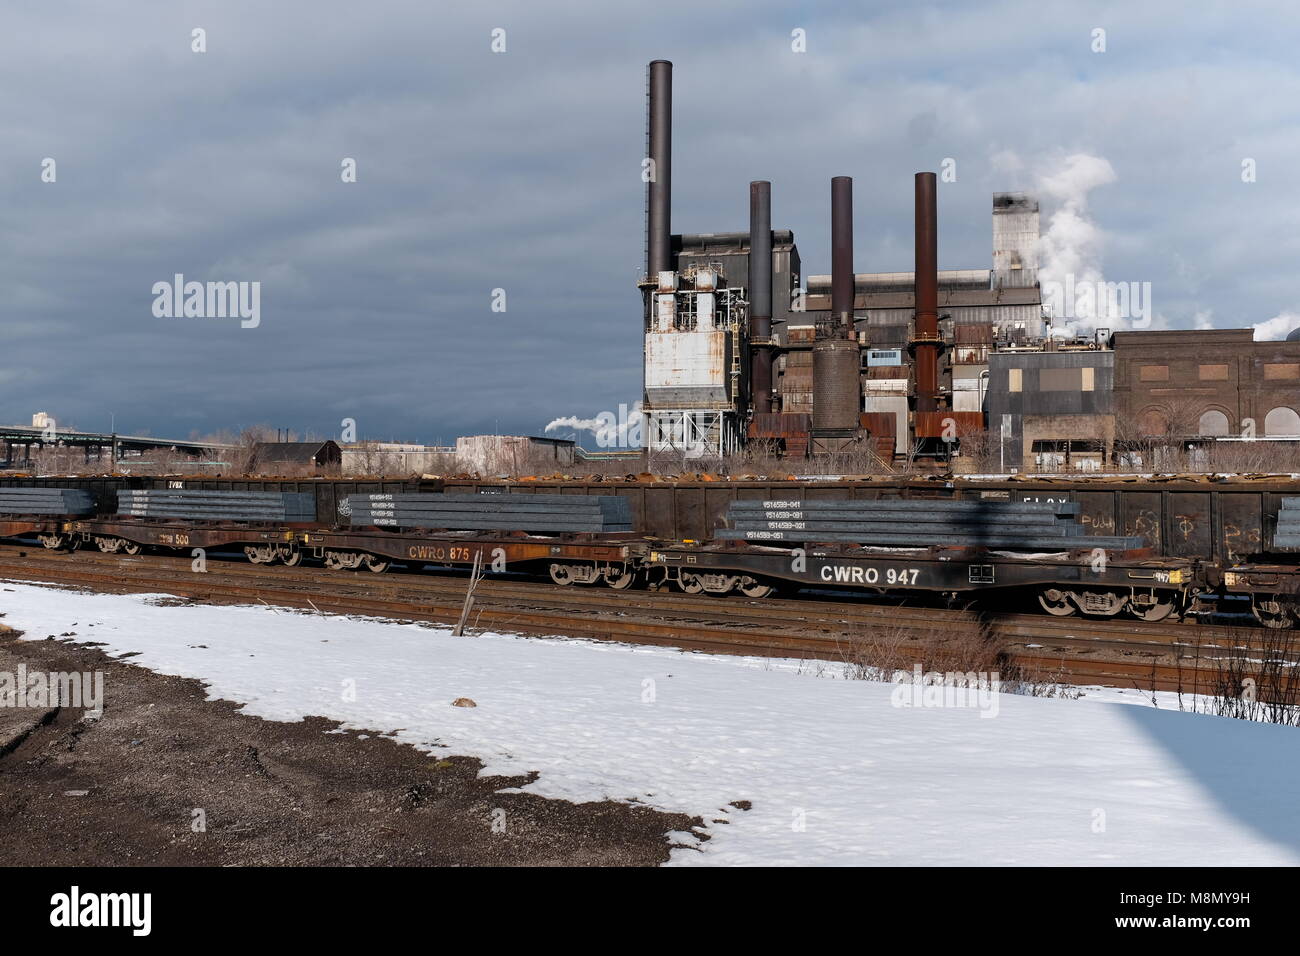 A functioning steelyard and factory in the midwest rust belt city of Cleveland, Ohio is shown on an overcast early March 2018 afternoon. Stock Photo